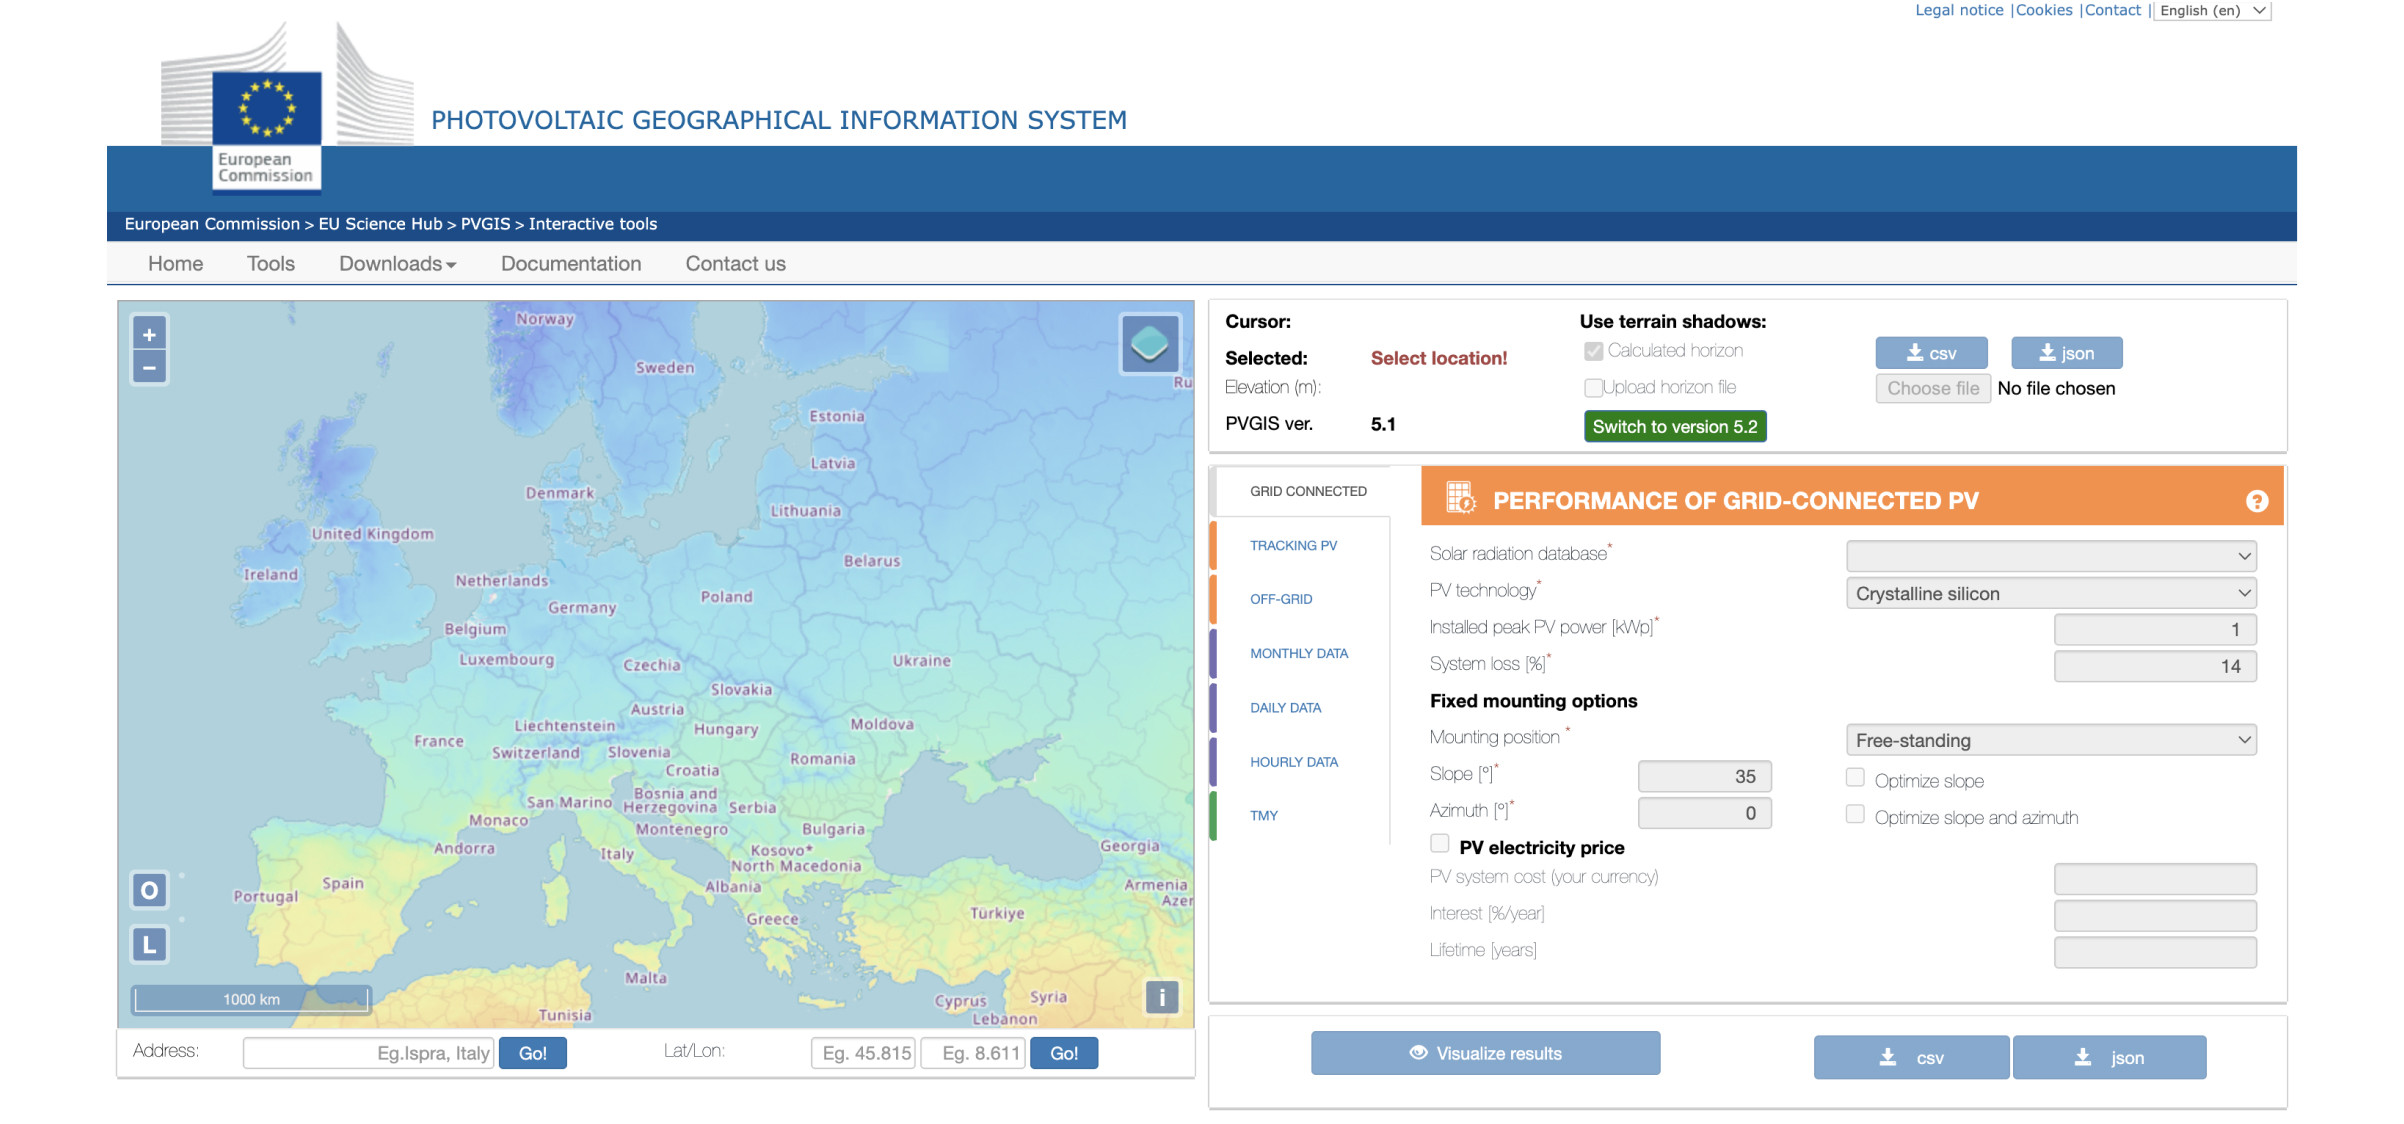 screenshot-photovoltaik-geographical-information-system-by-european-commission-2400x1120.jpg